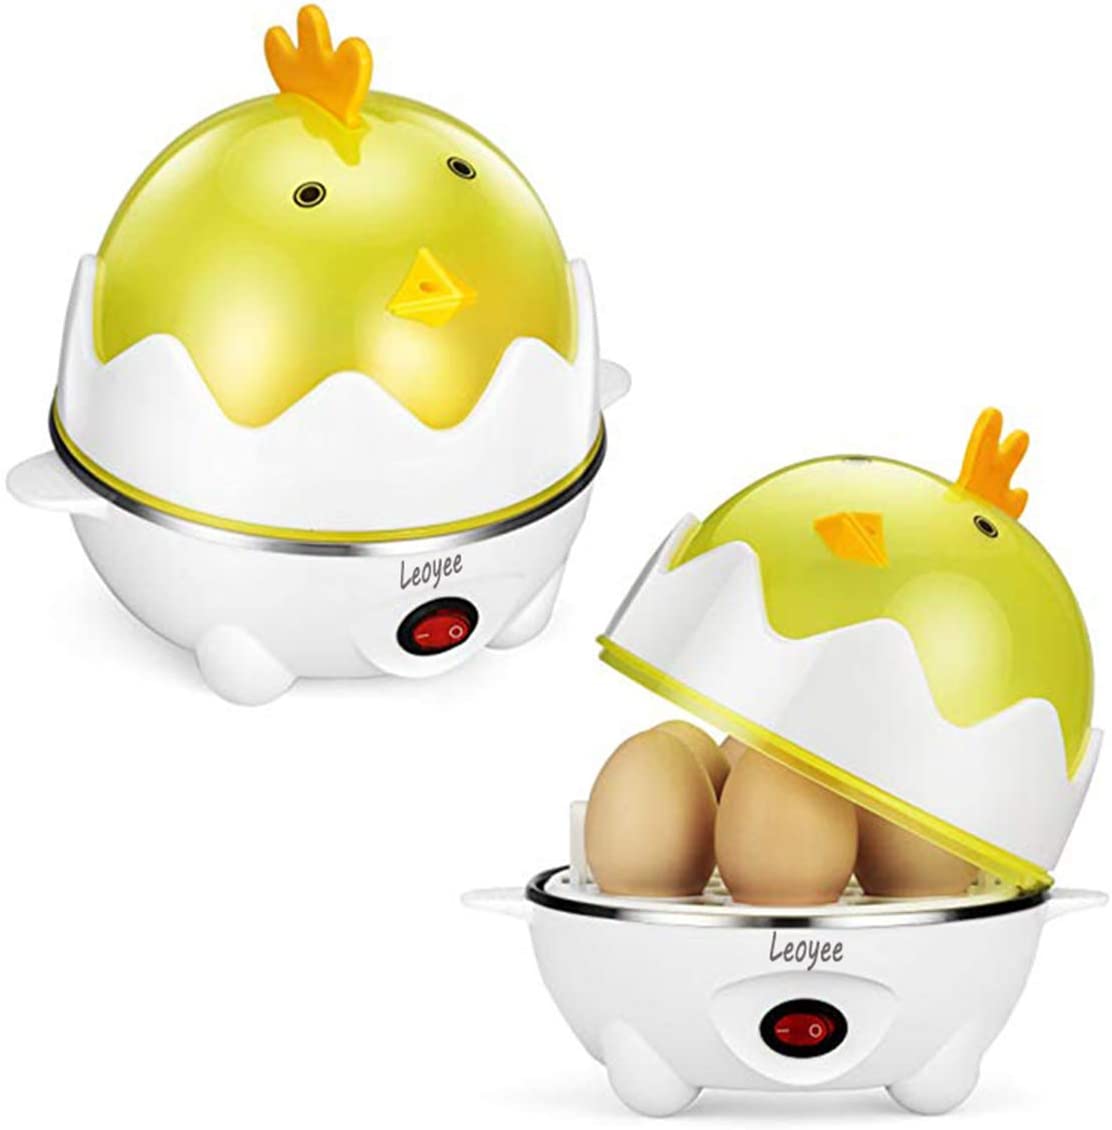 Leoyee Egg Cooker for 1-7 Eggs with Indicator Light Automatic Shut-Off (Yellow)